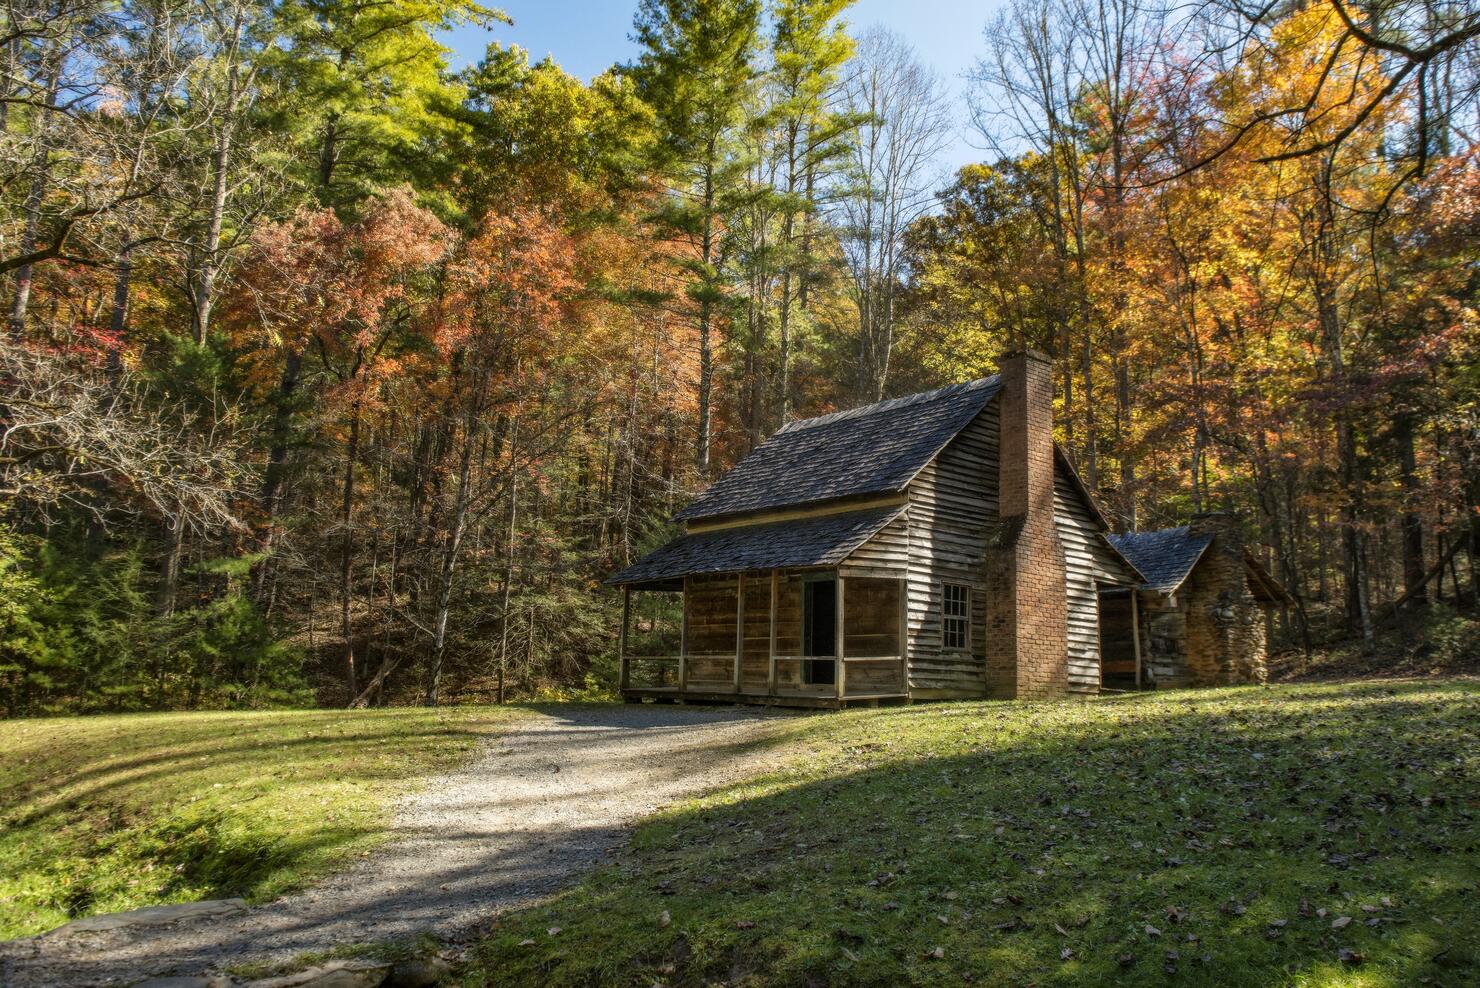 The Henry Whitehead homestead located in Cades Cove in the Great Smoky Mountains National Park is surrounded by colorful fall foliage.